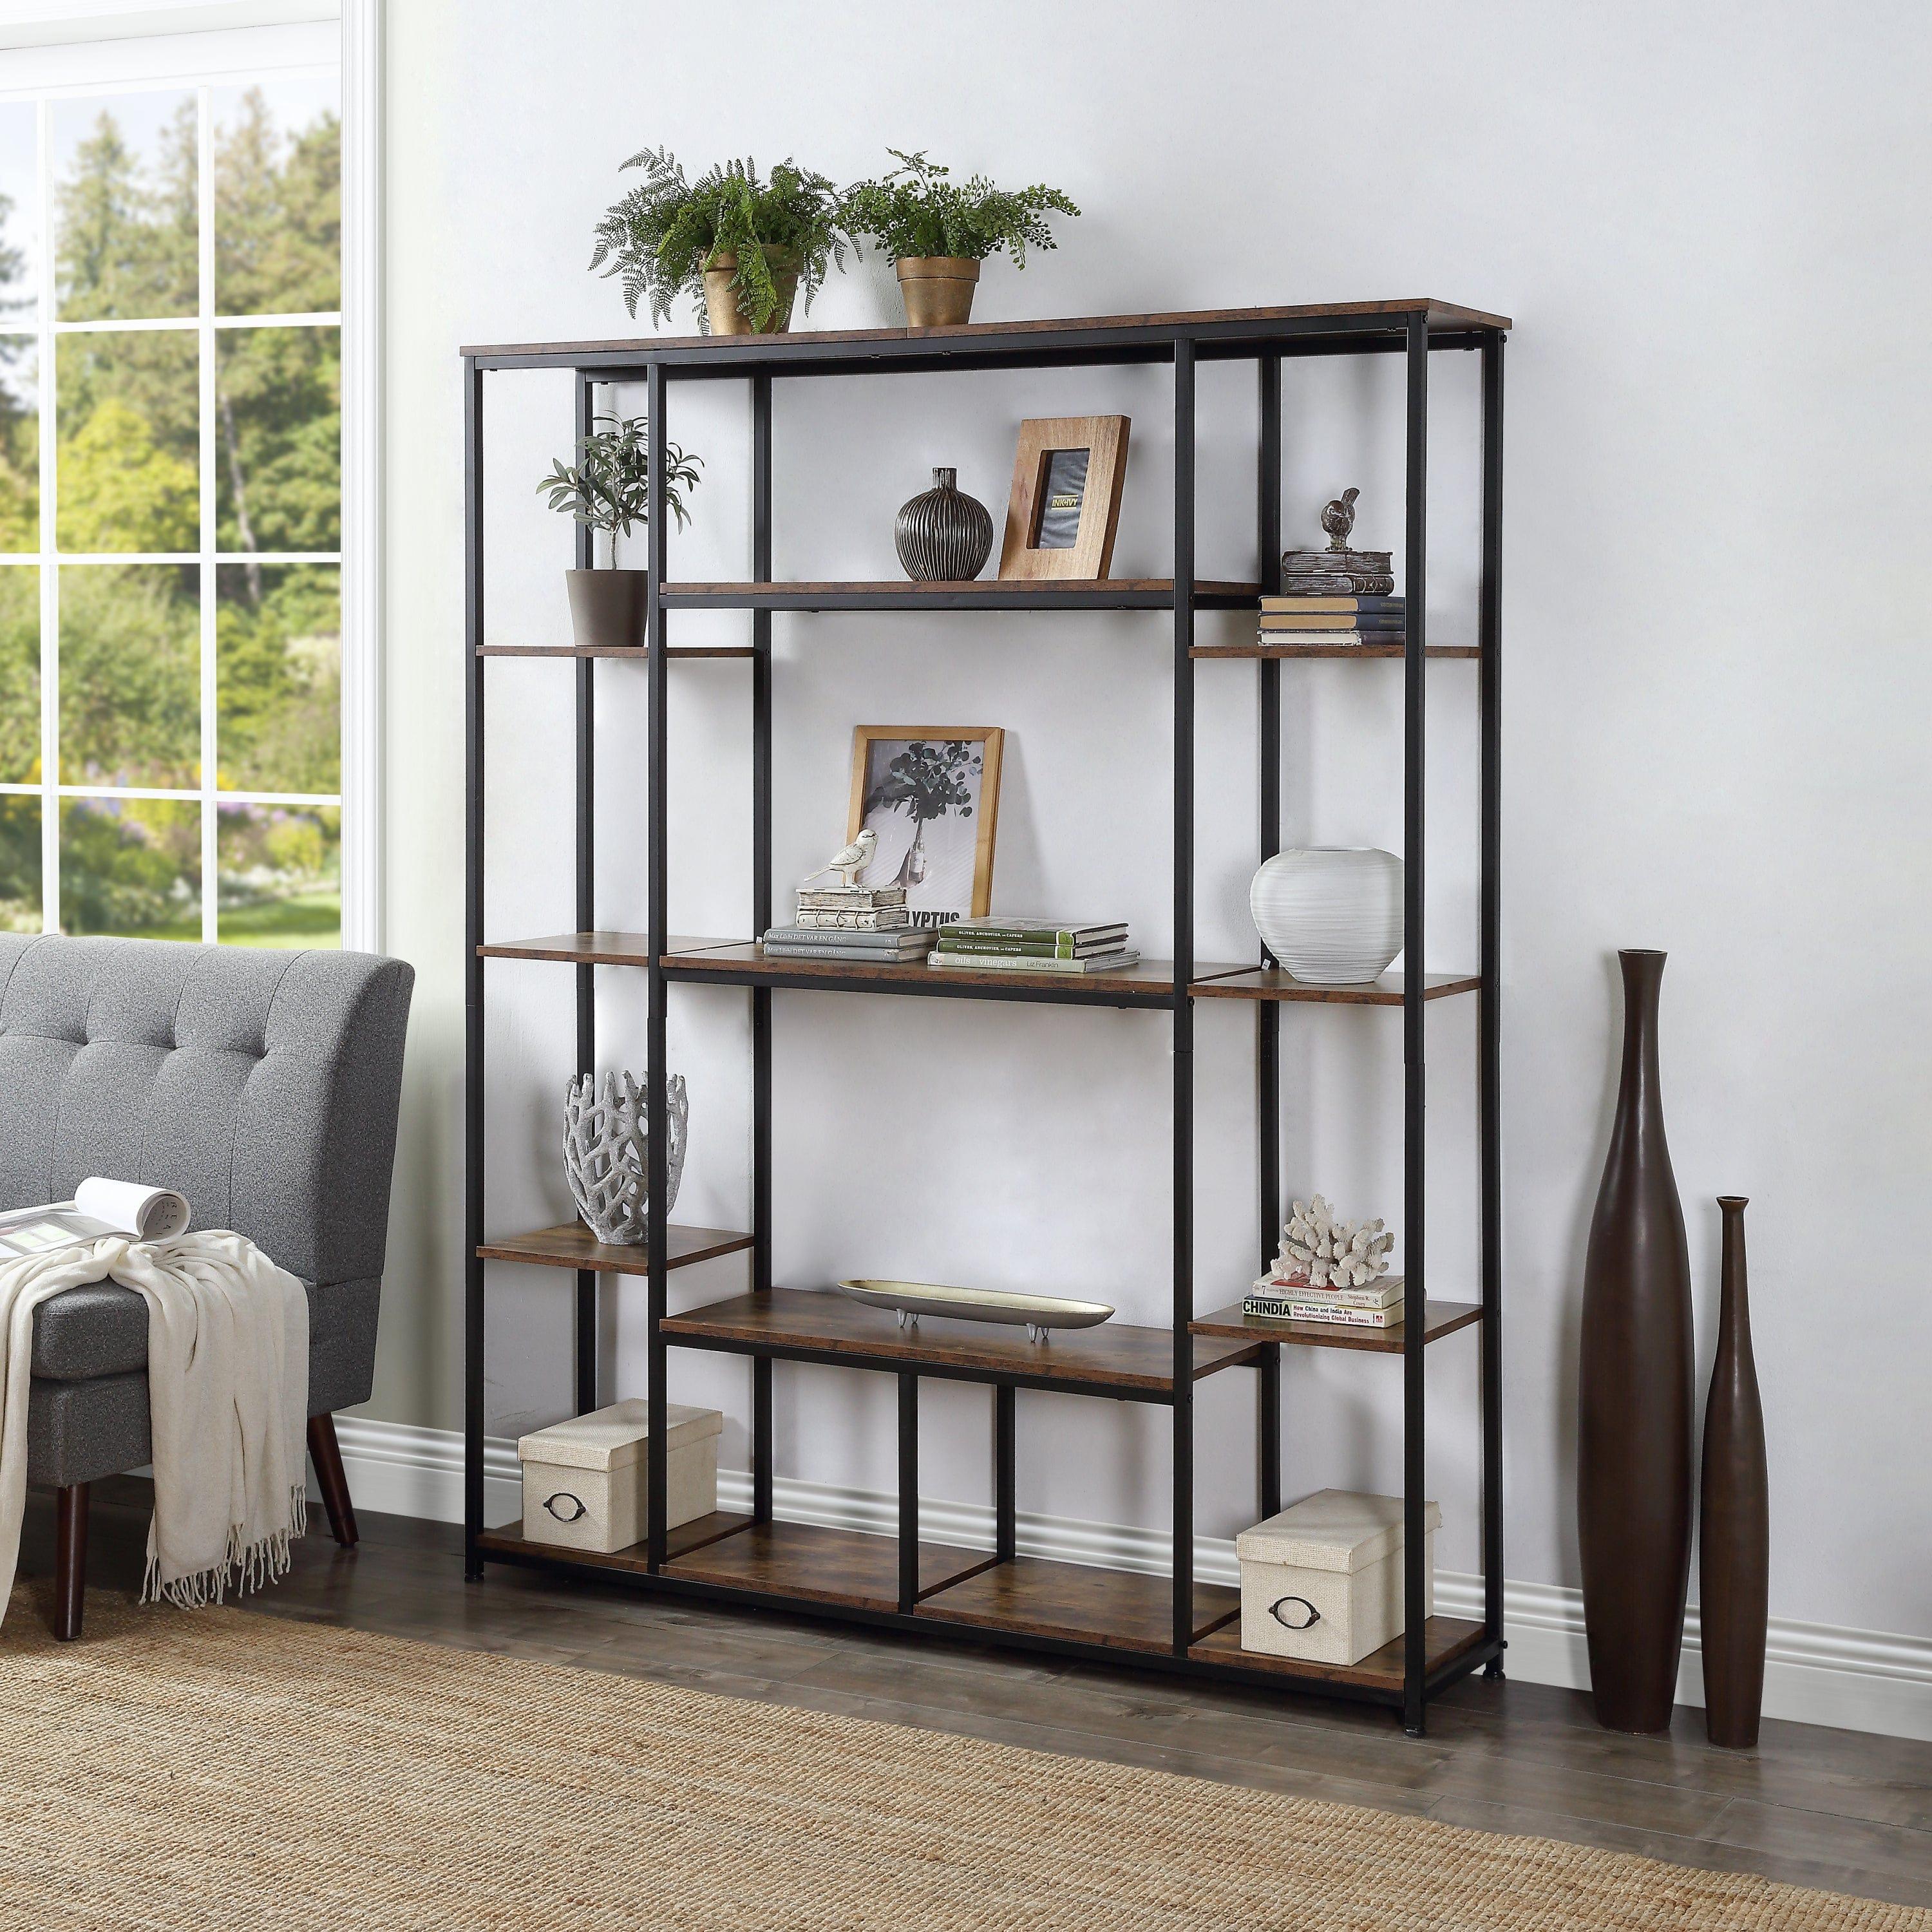 Shop [VIDEO] Bookcase and Bookshelf, Home Office 5 Tier Bookshelf, Open Freestanding Storage Shelf with Metal Frame, Tiger Mademoiselle Home Decor